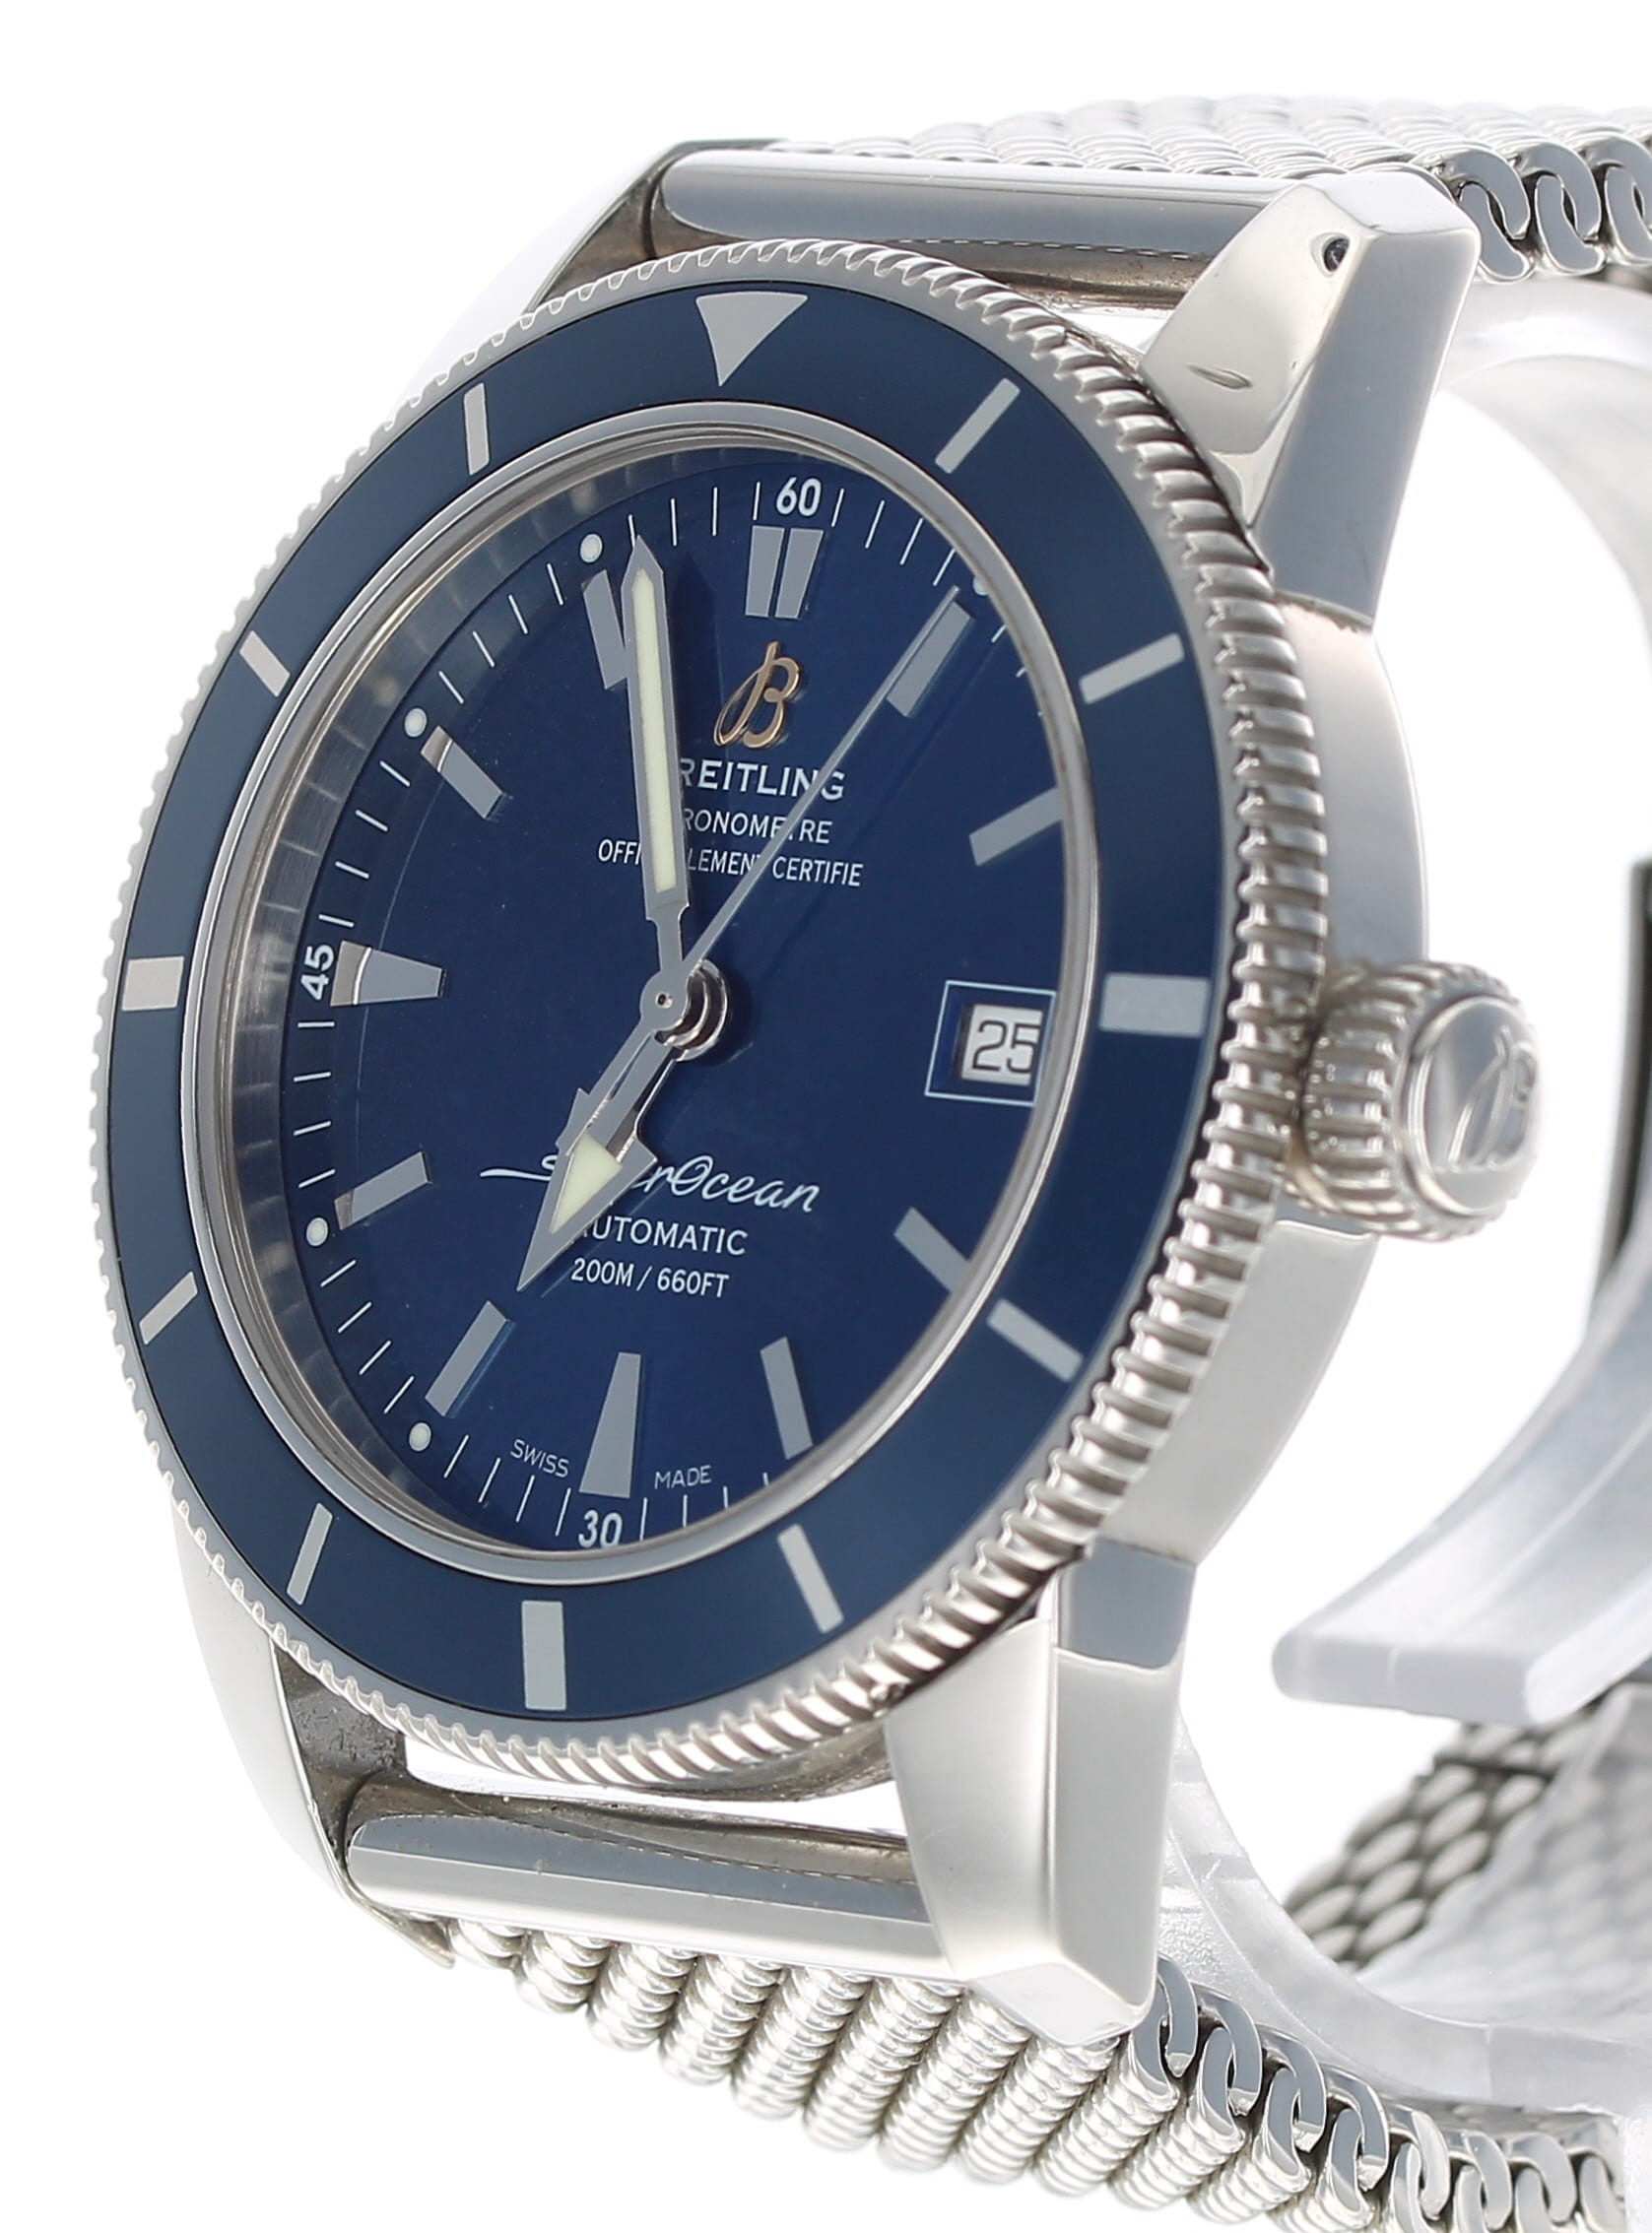 Breitling SuperOcean Heritage automatic stainless steel gentleman's wristwatch, reference no. - Image 3 of 6